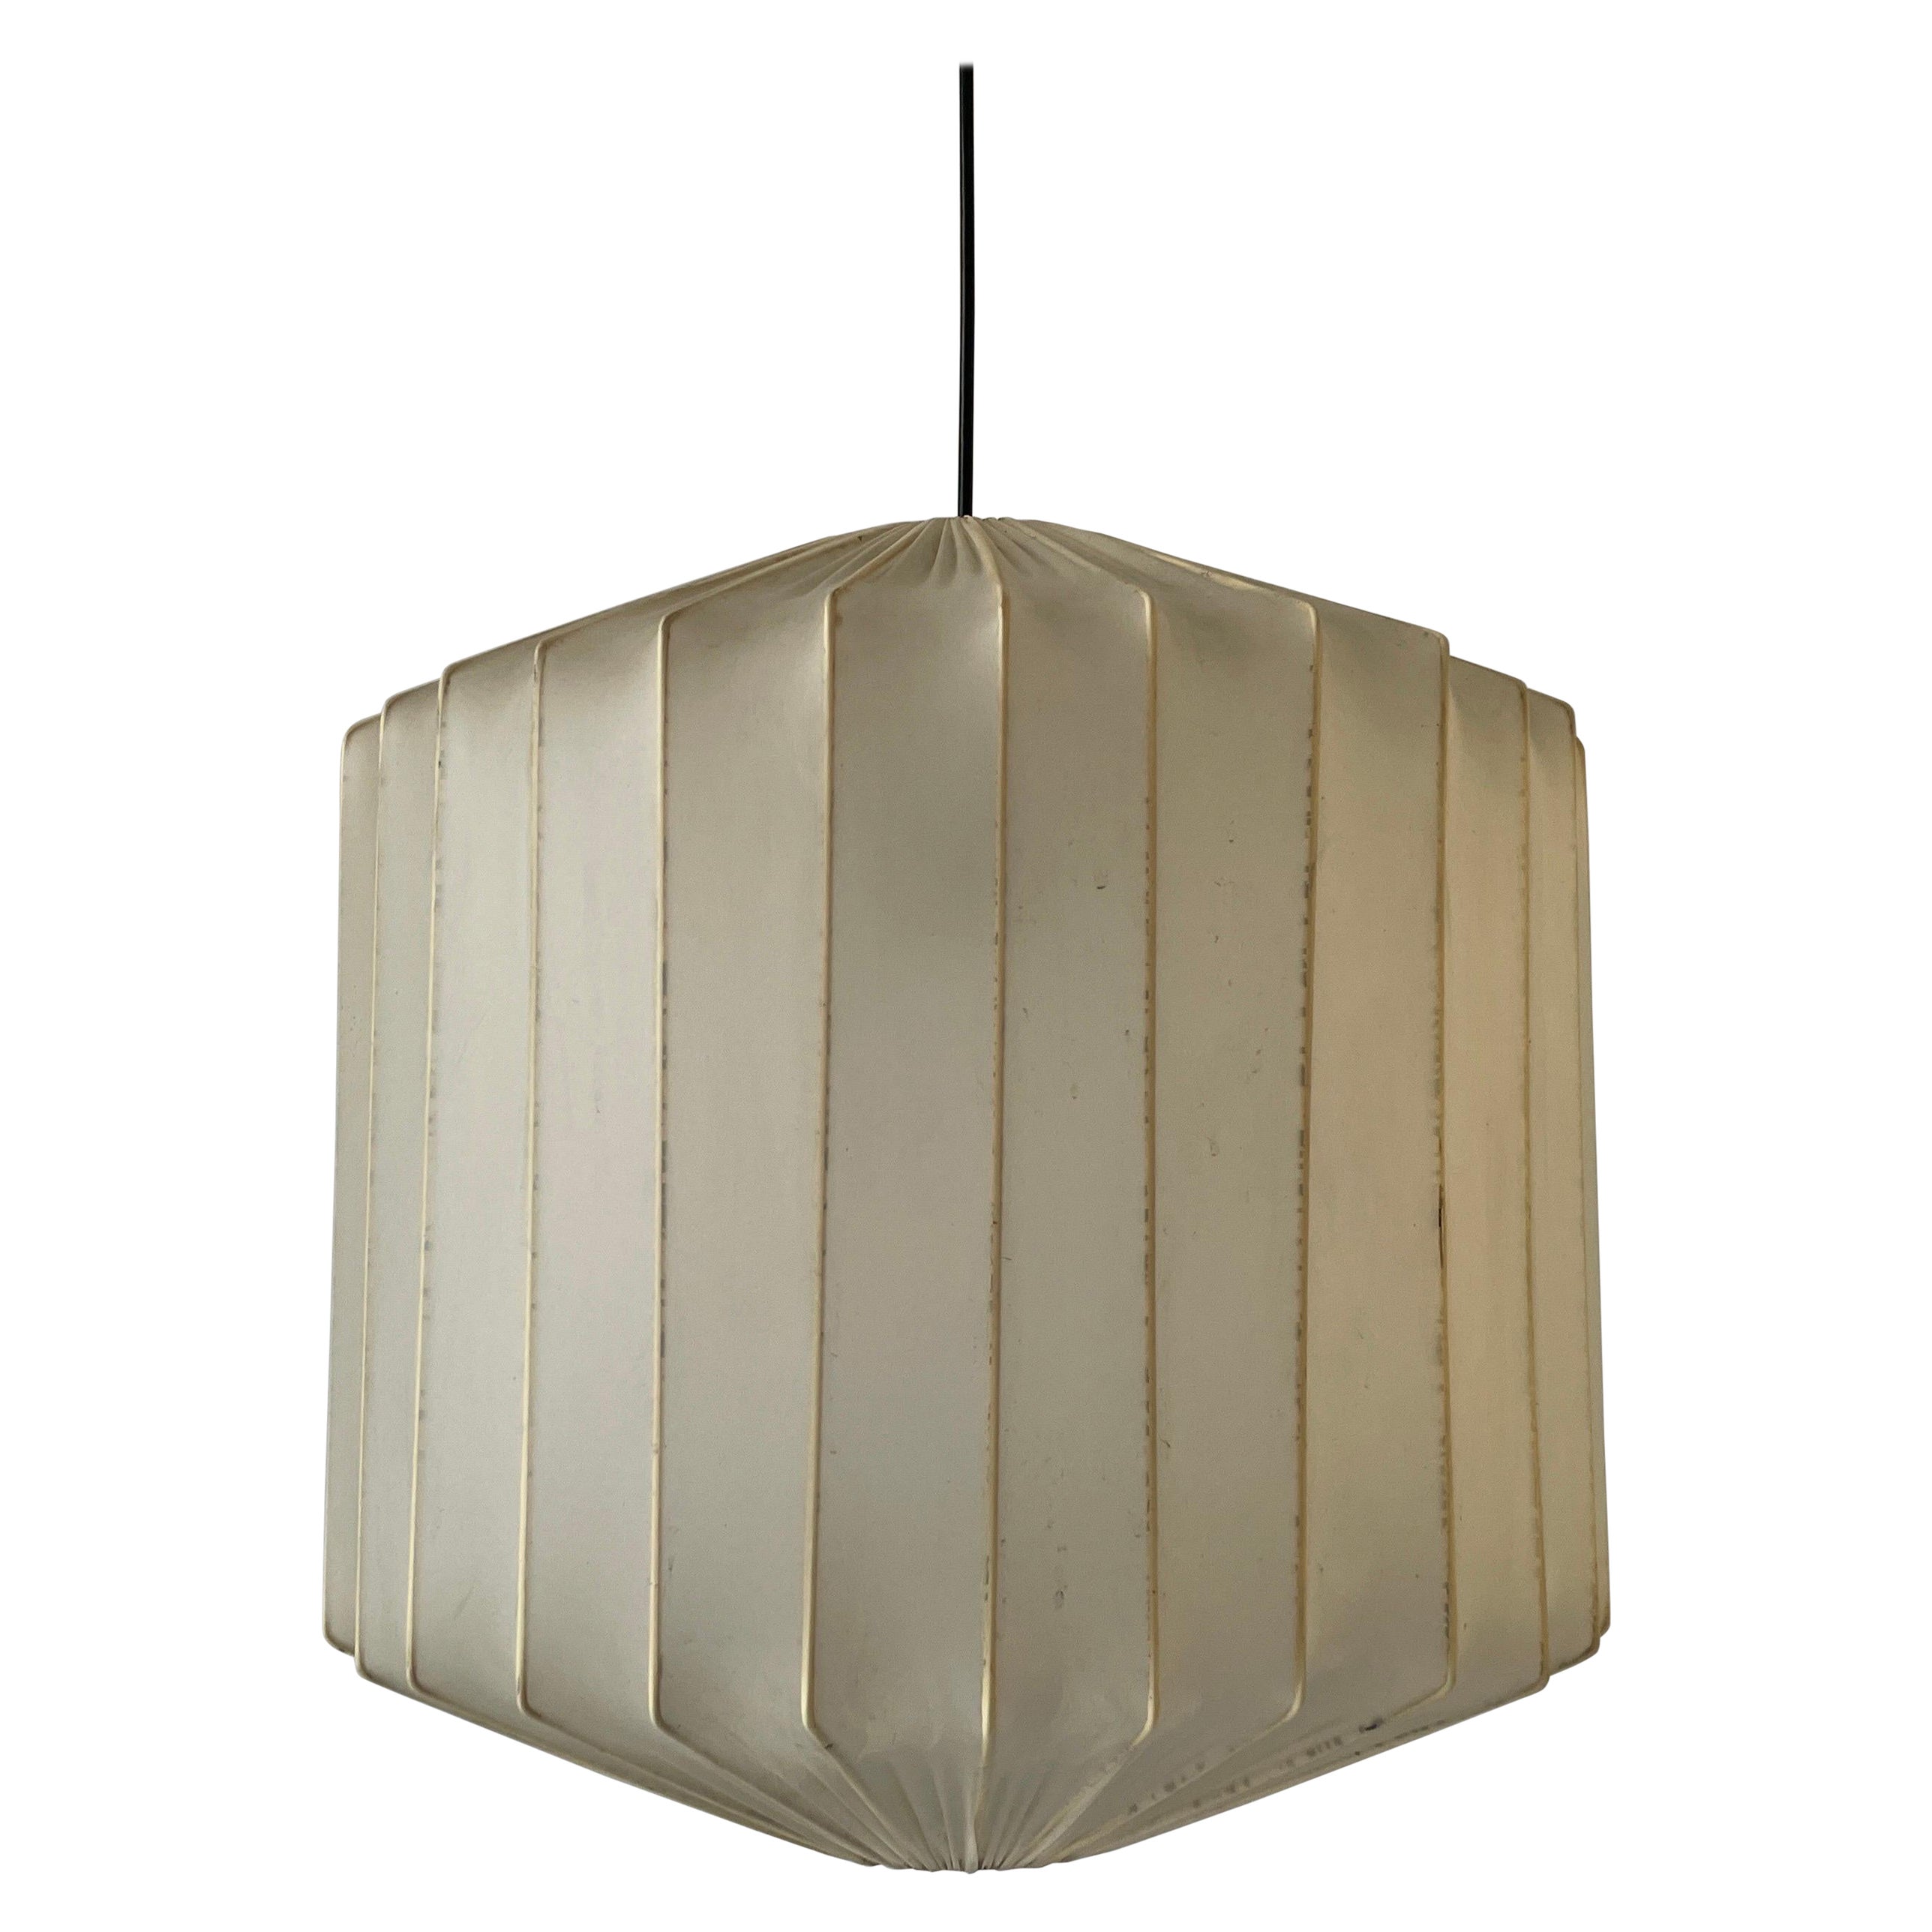 Satin Silk Fabric Ceiling Lamp in Cocoon Shape, 1960s, Italy For Sale